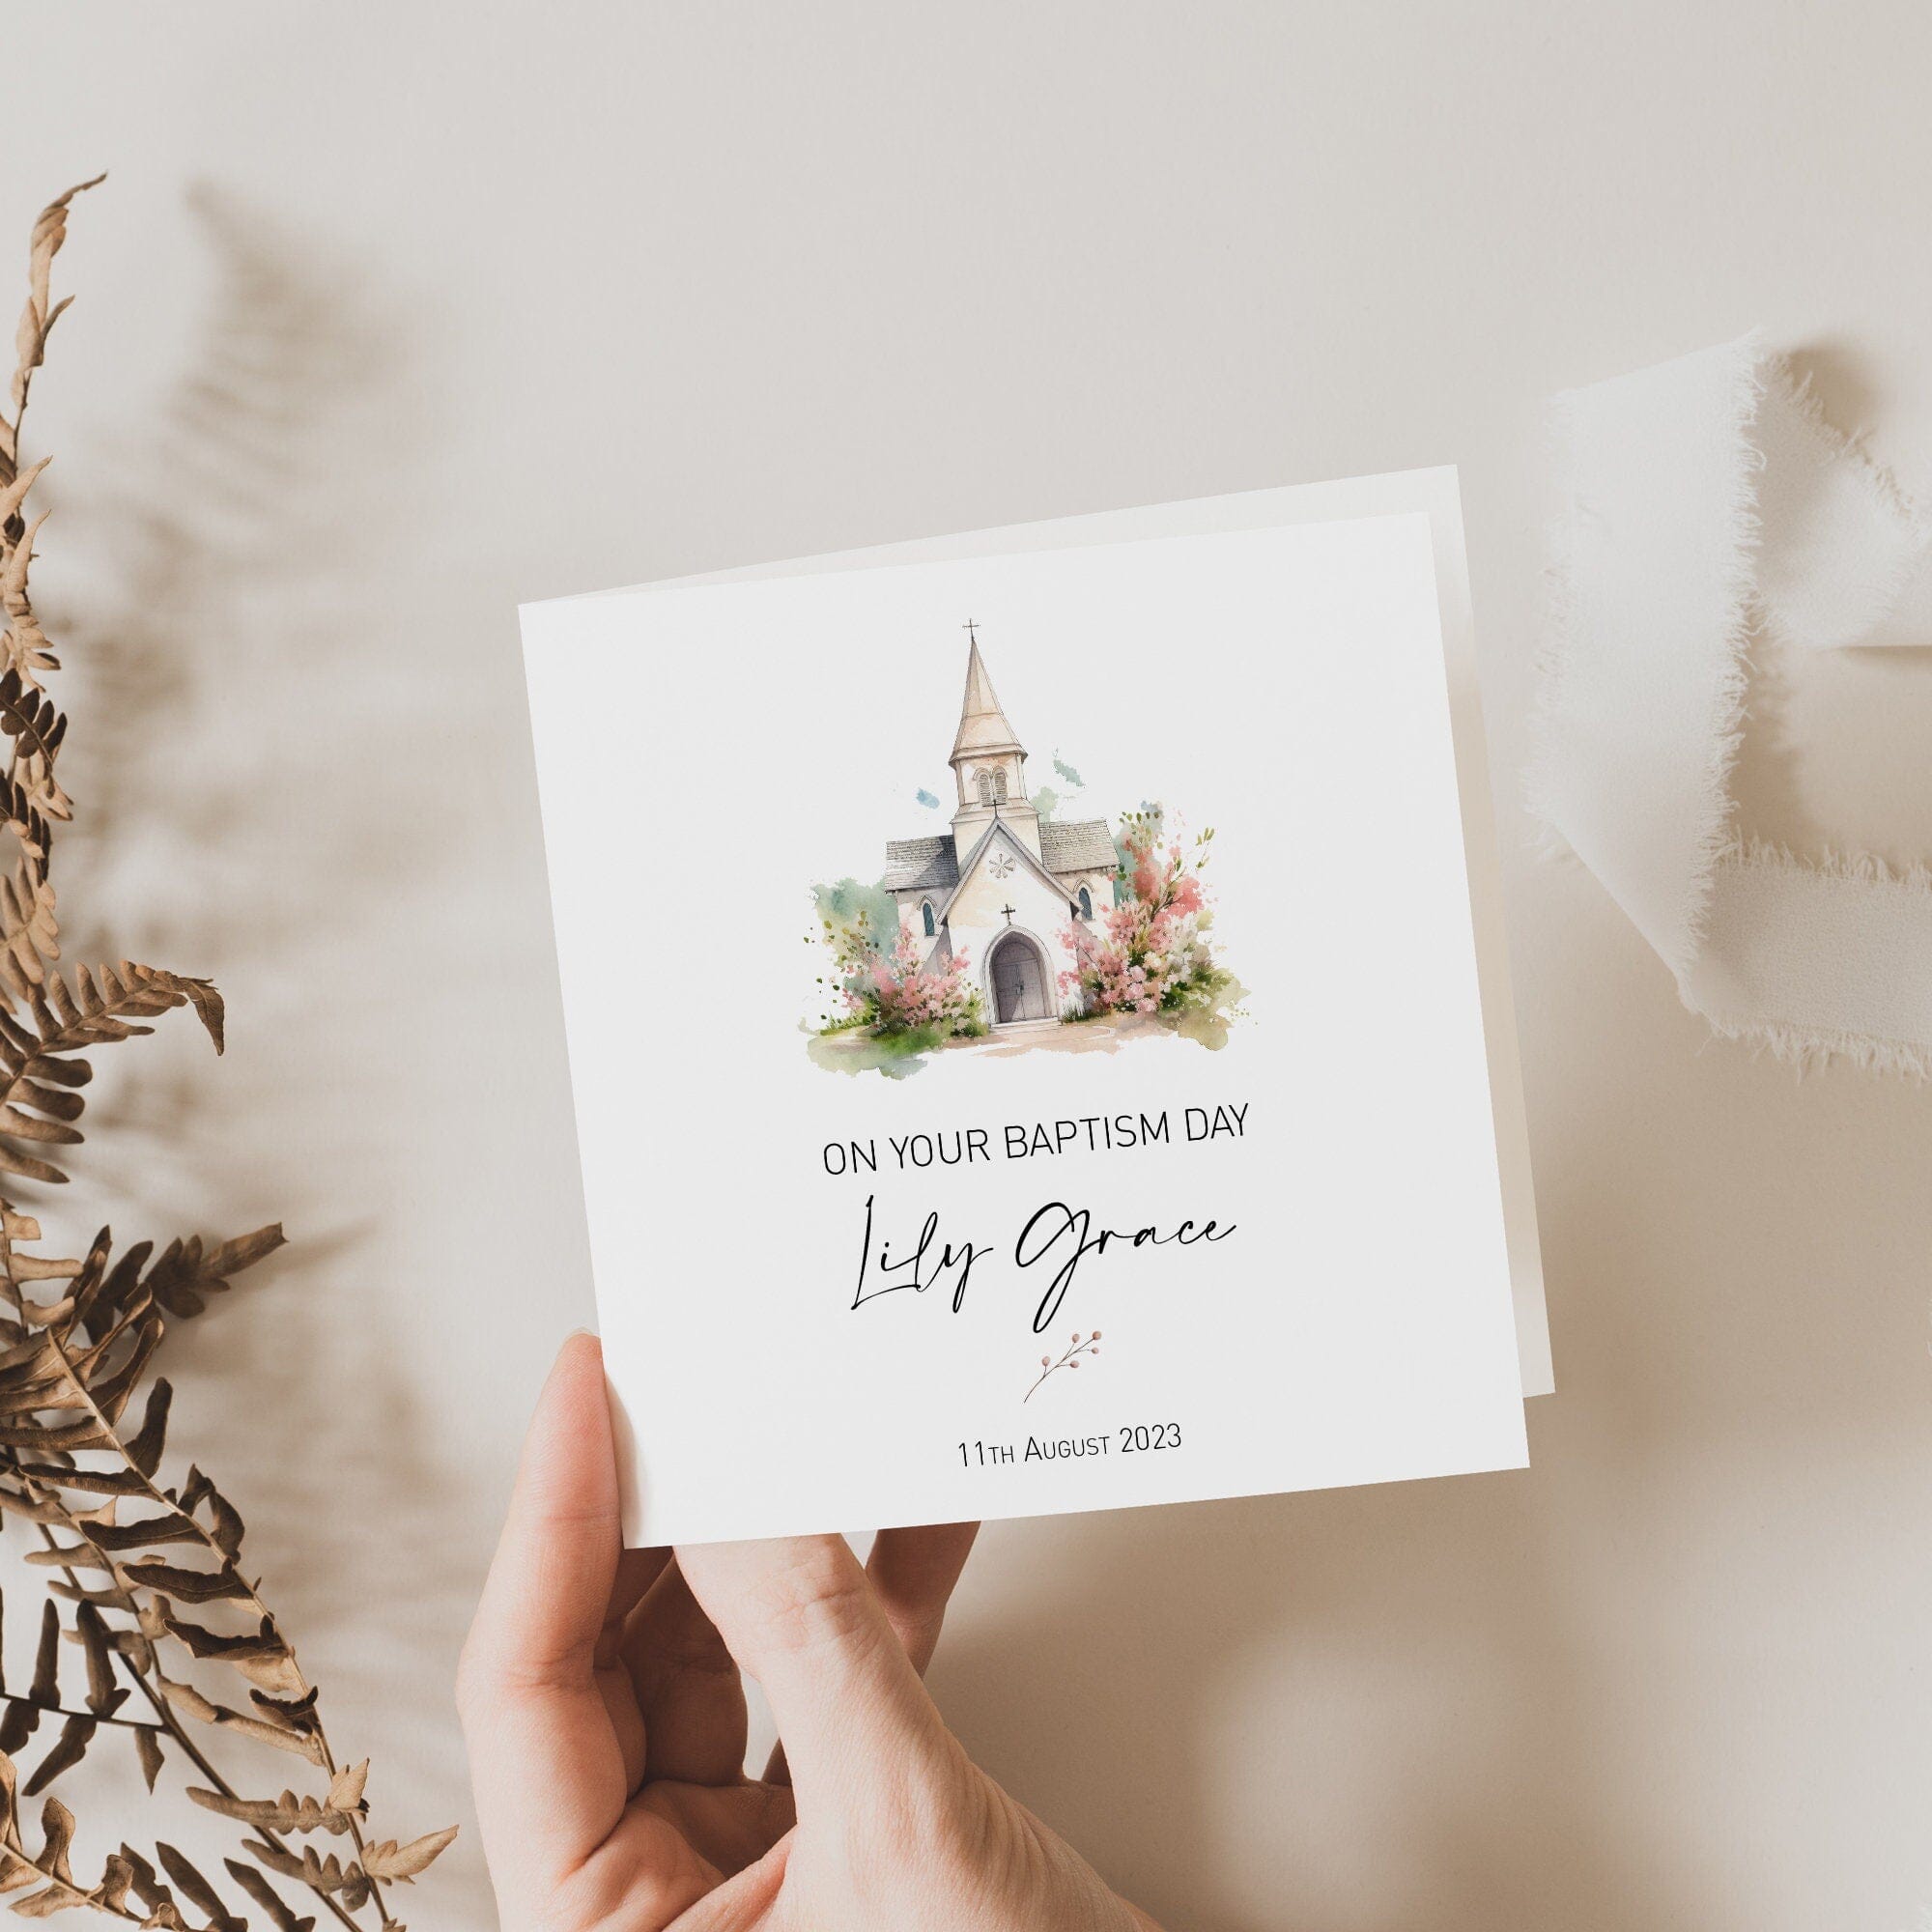 Personalised Baptism Card with Envelope with date and name, On Your Baptism Greeting Card with a Church